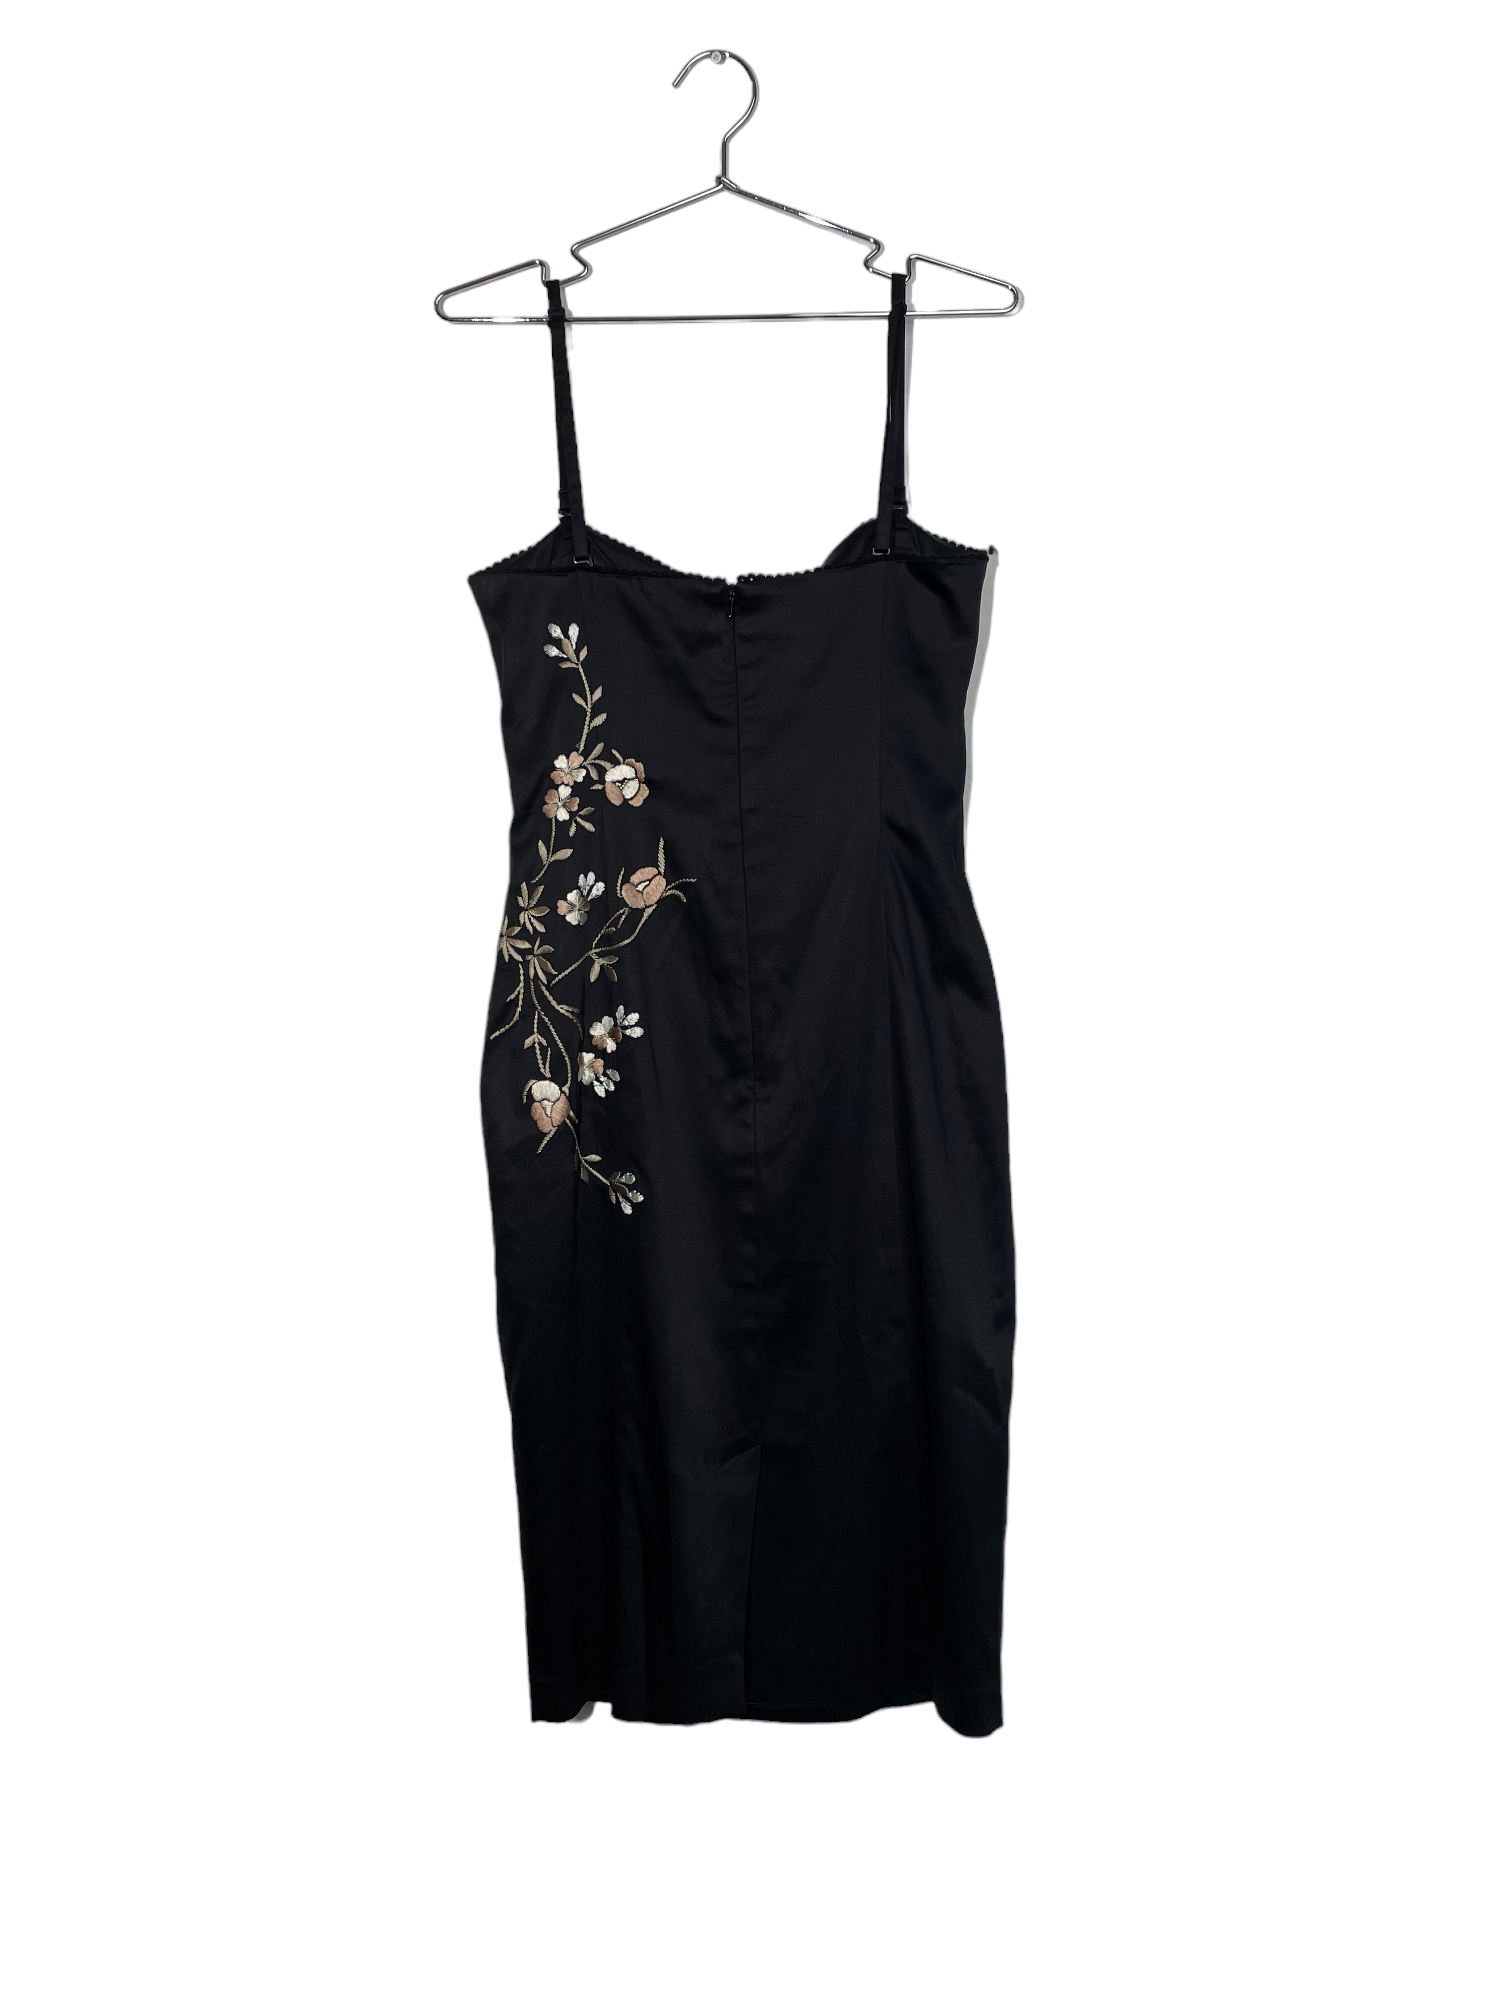 Warehouse Floral Embroidered Black Dress